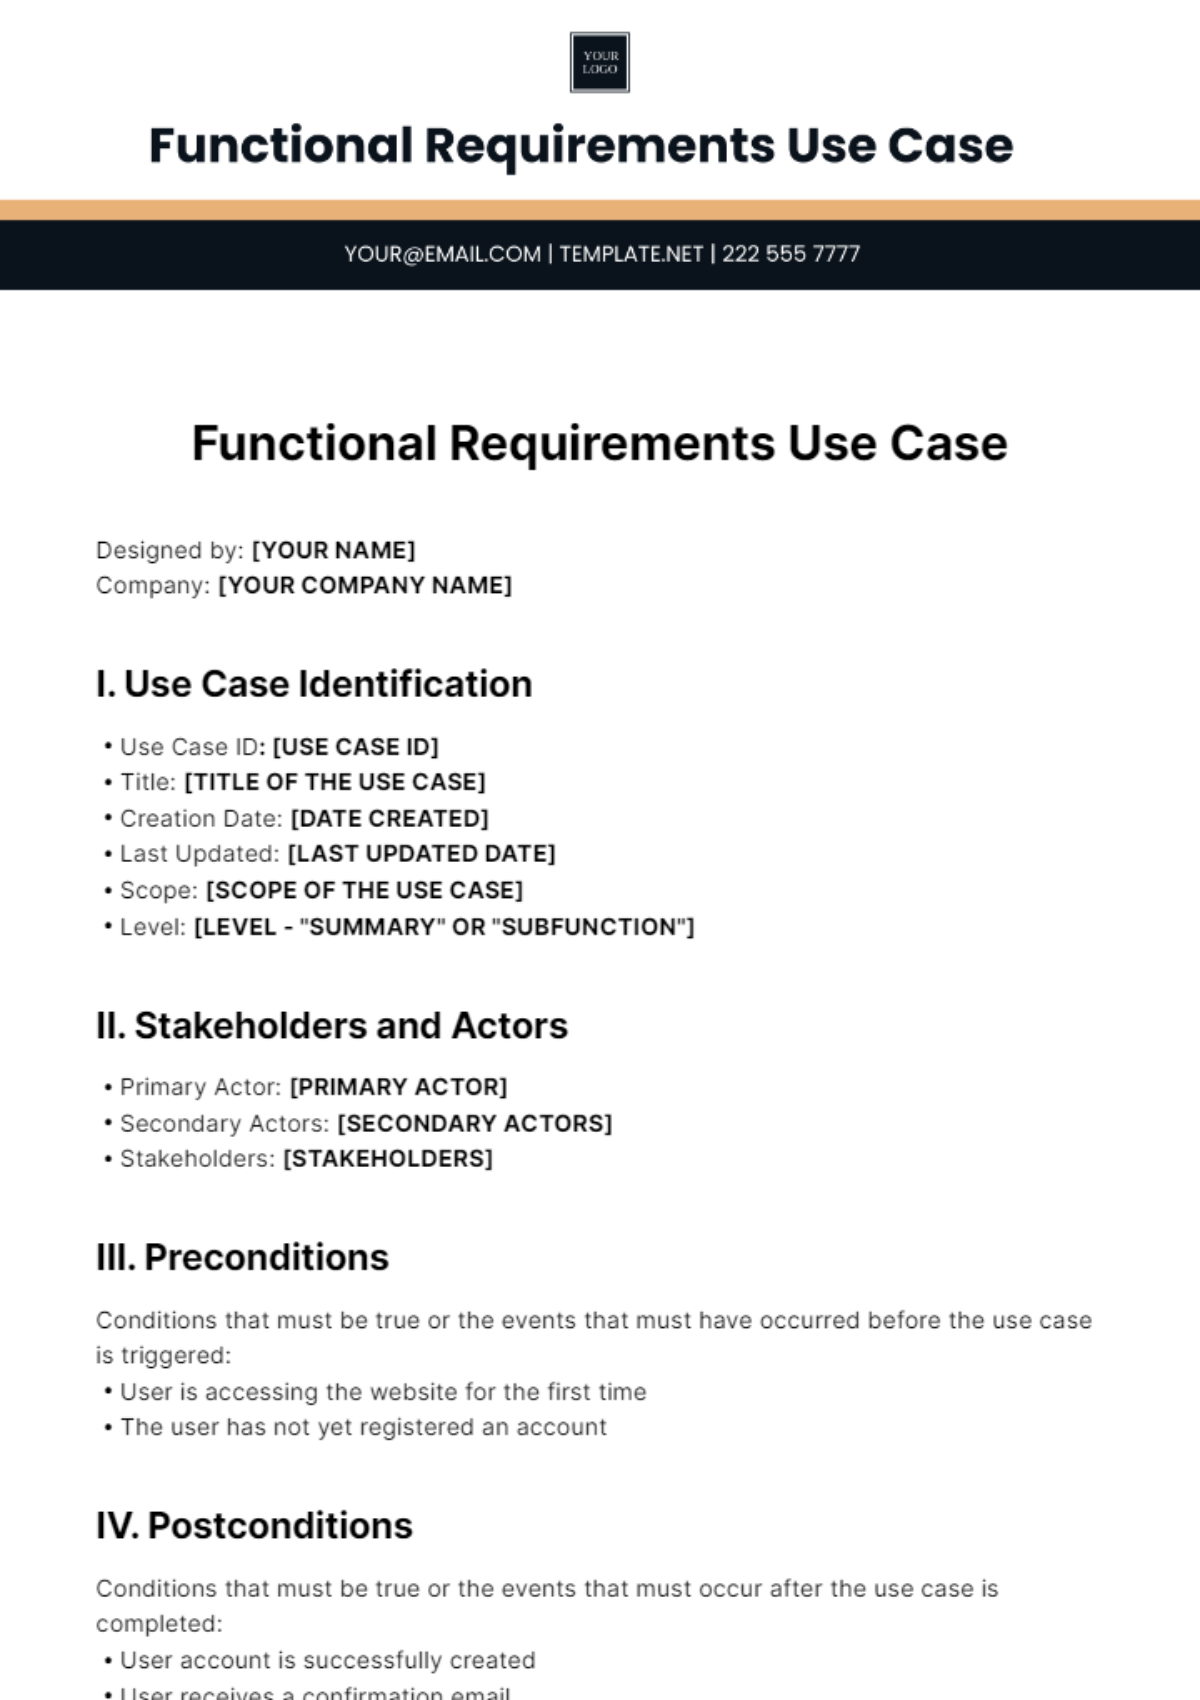 Functional Requirements Use Case Template